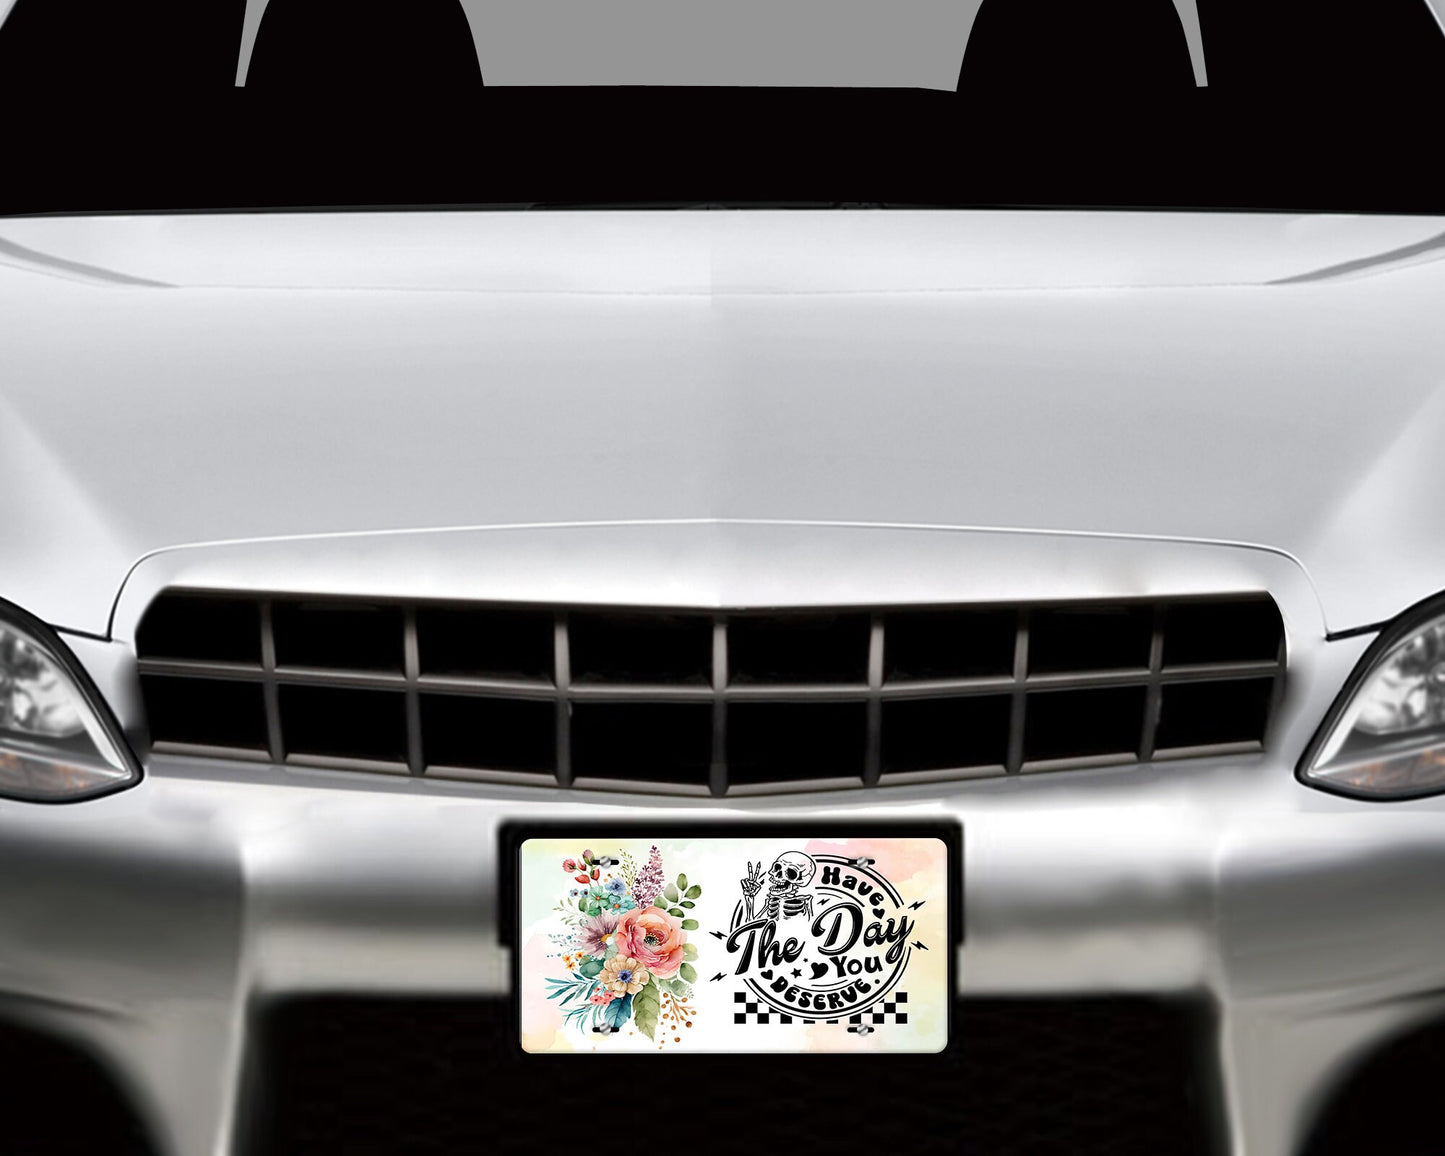 Have the Day You Deserve Aluminum Vanity License Plate Car Accessory Decorative Front Plate